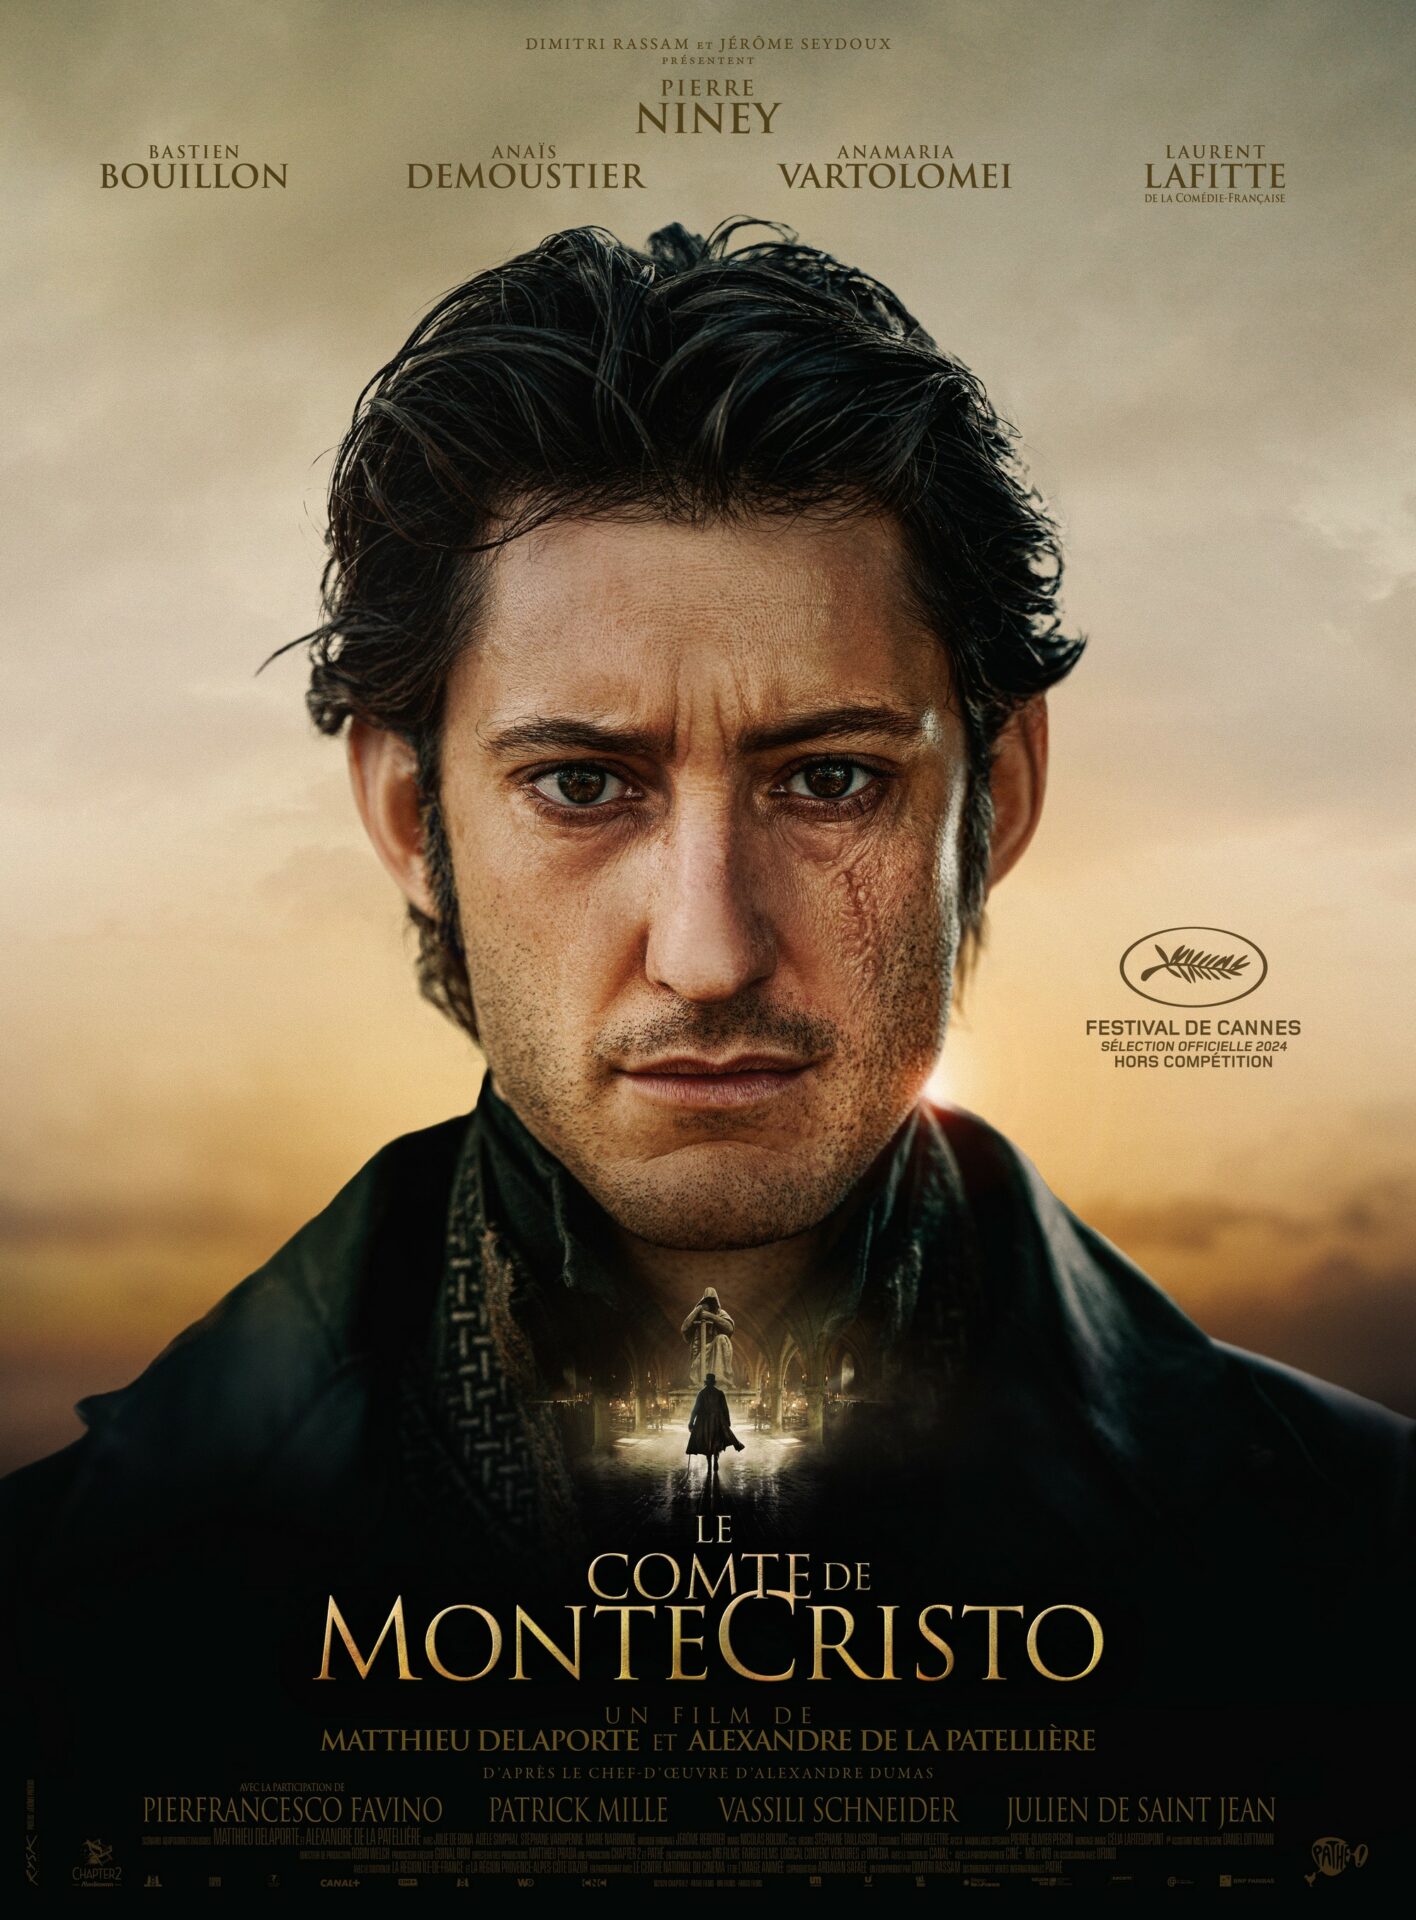 The Count of Monte Cristo: Pierre Niney looks for a fight in the first trailer